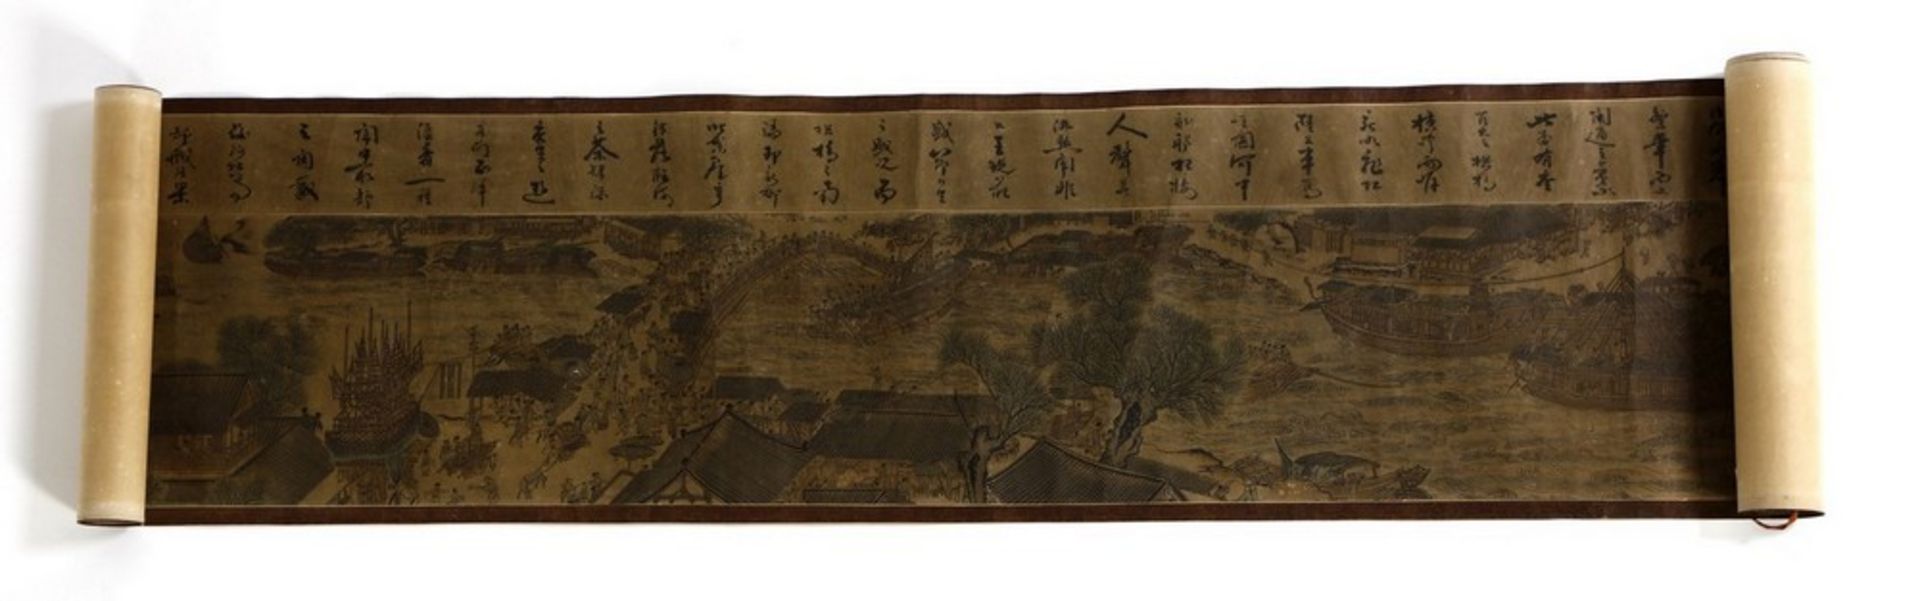 Arte Cinese A very long scroll on paper with a copy of Zhang Zeduan famous painting China, 20th cen - Image 5 of 11